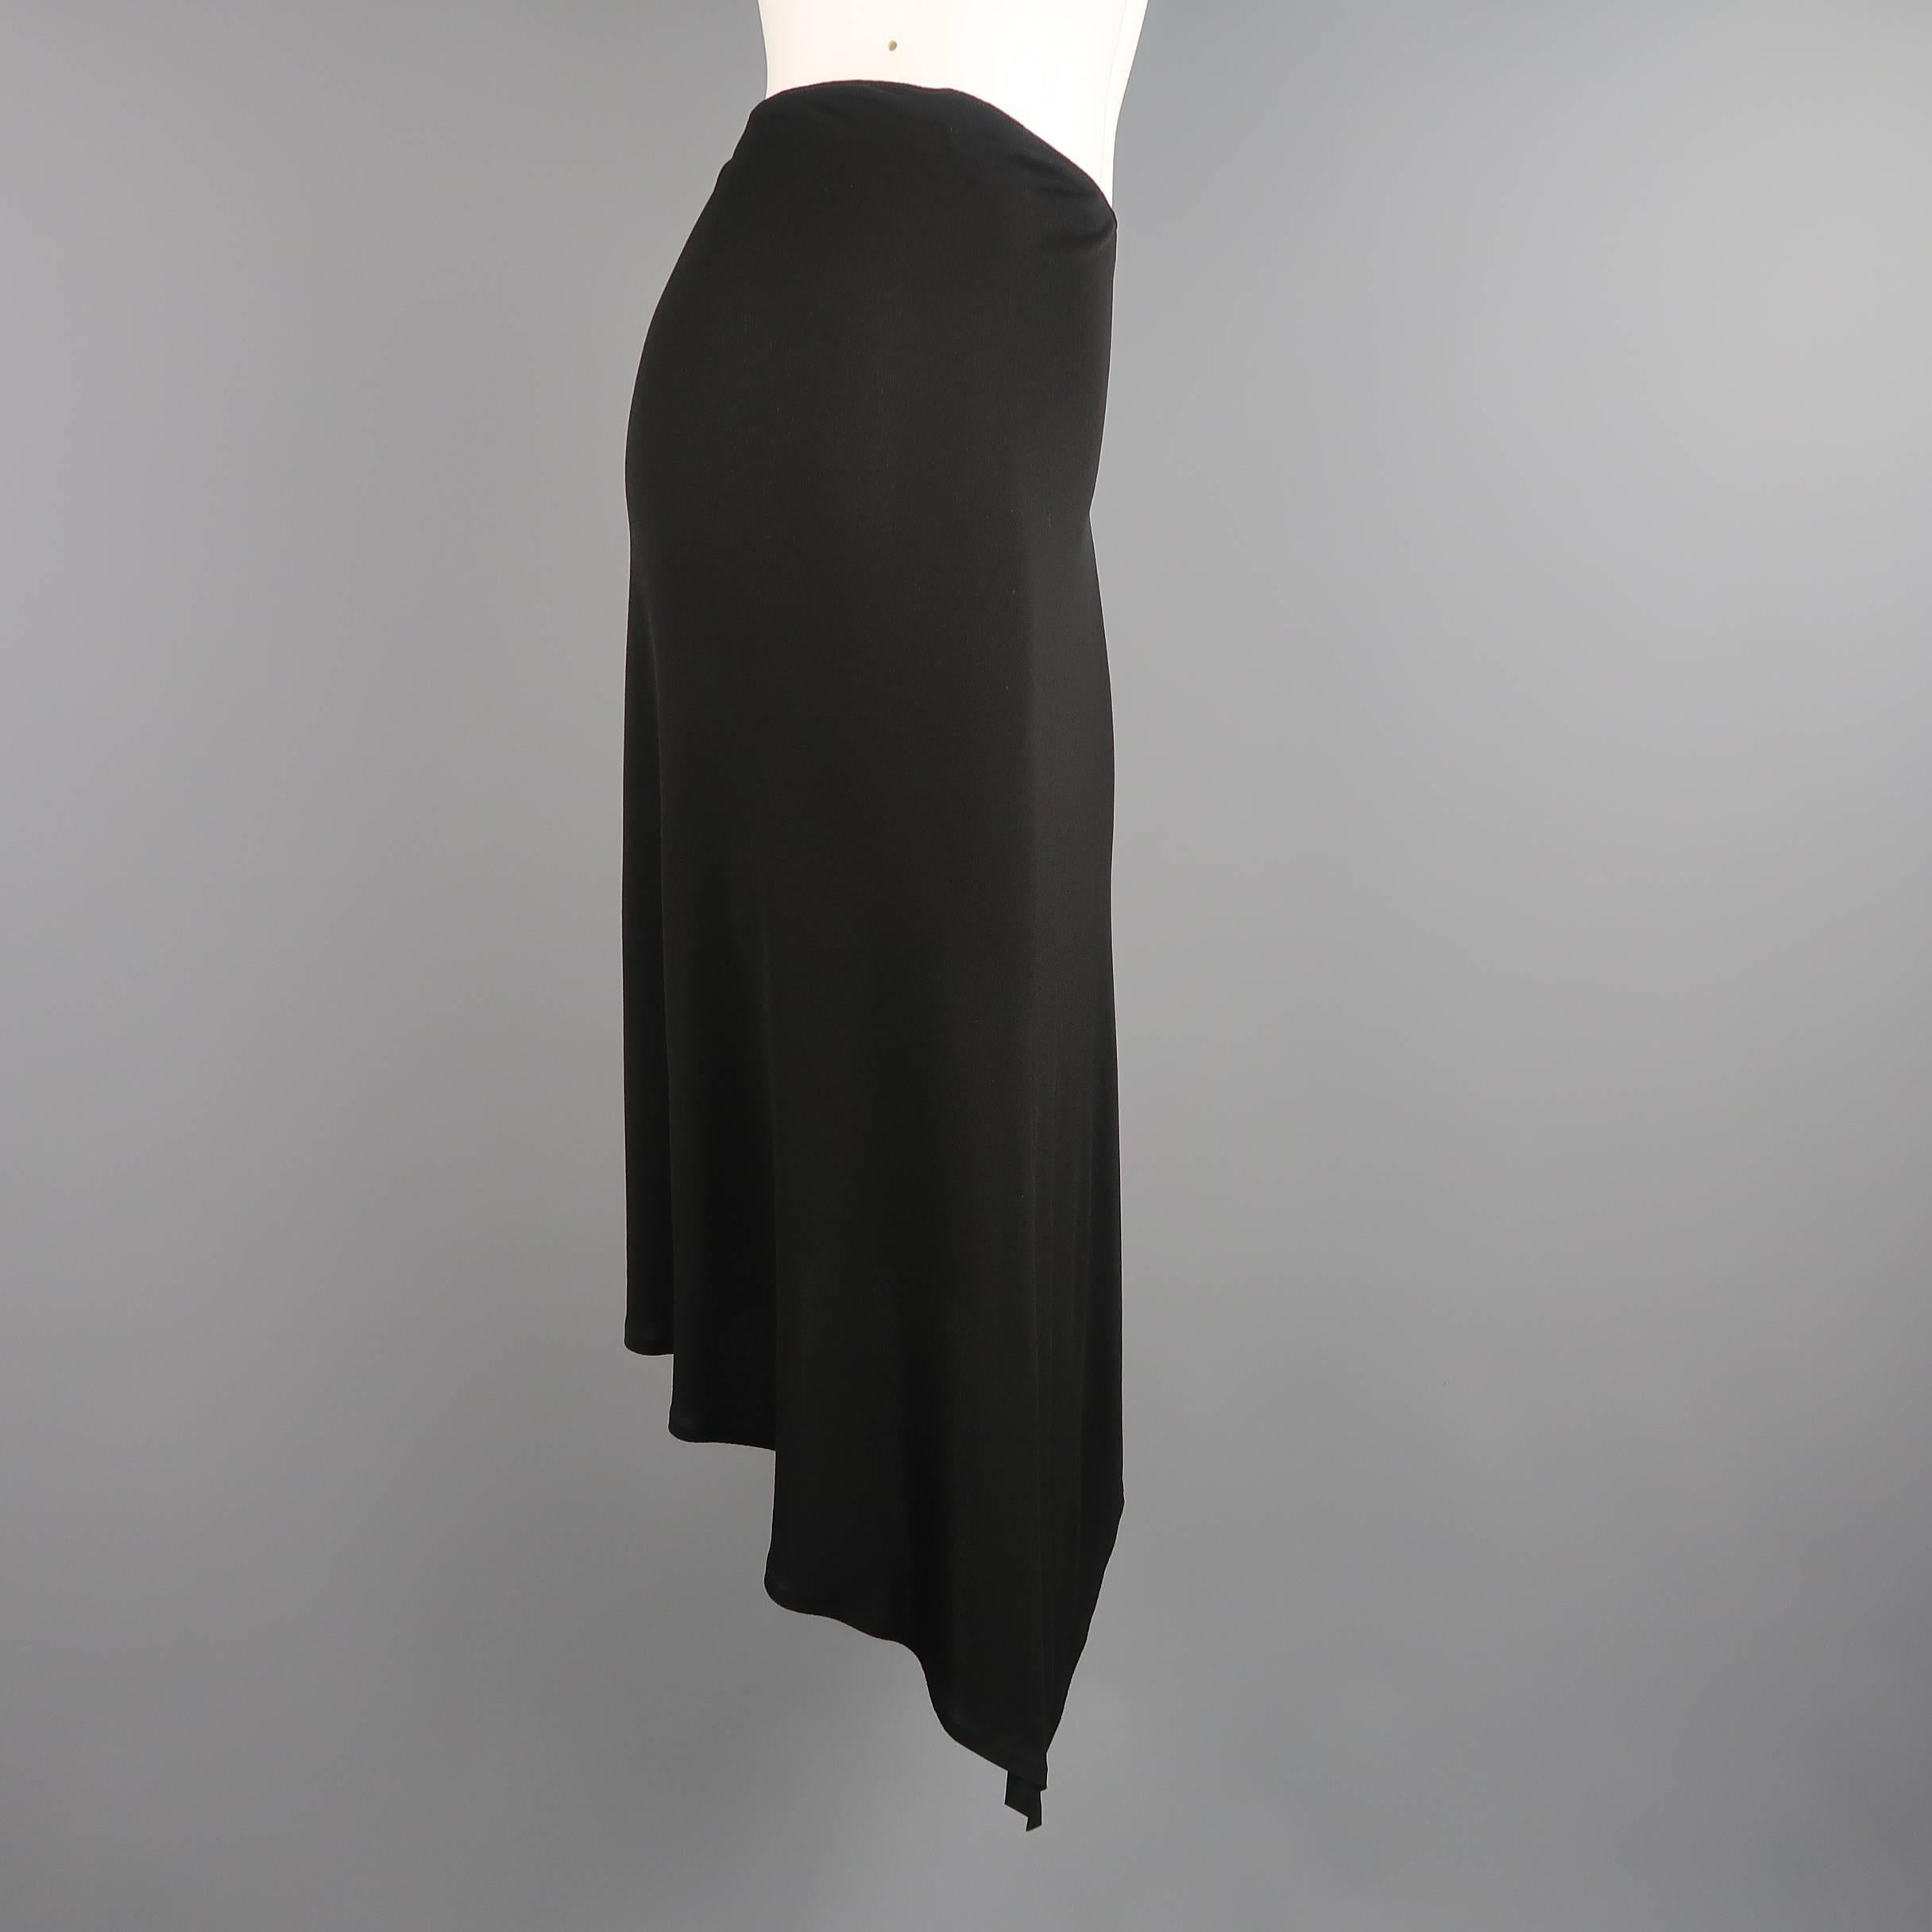 JEAN PAUL GAULTIER skirt comes in a semi sheer rayon material and features an A line silhouette and asymmetrical pointed front, short back hem line.  Made in Italy.
 
Excellent Pre-Owned Condition.
Marked: 10
 
Measurements:
 
Waist: 30 in.
Hip: 35